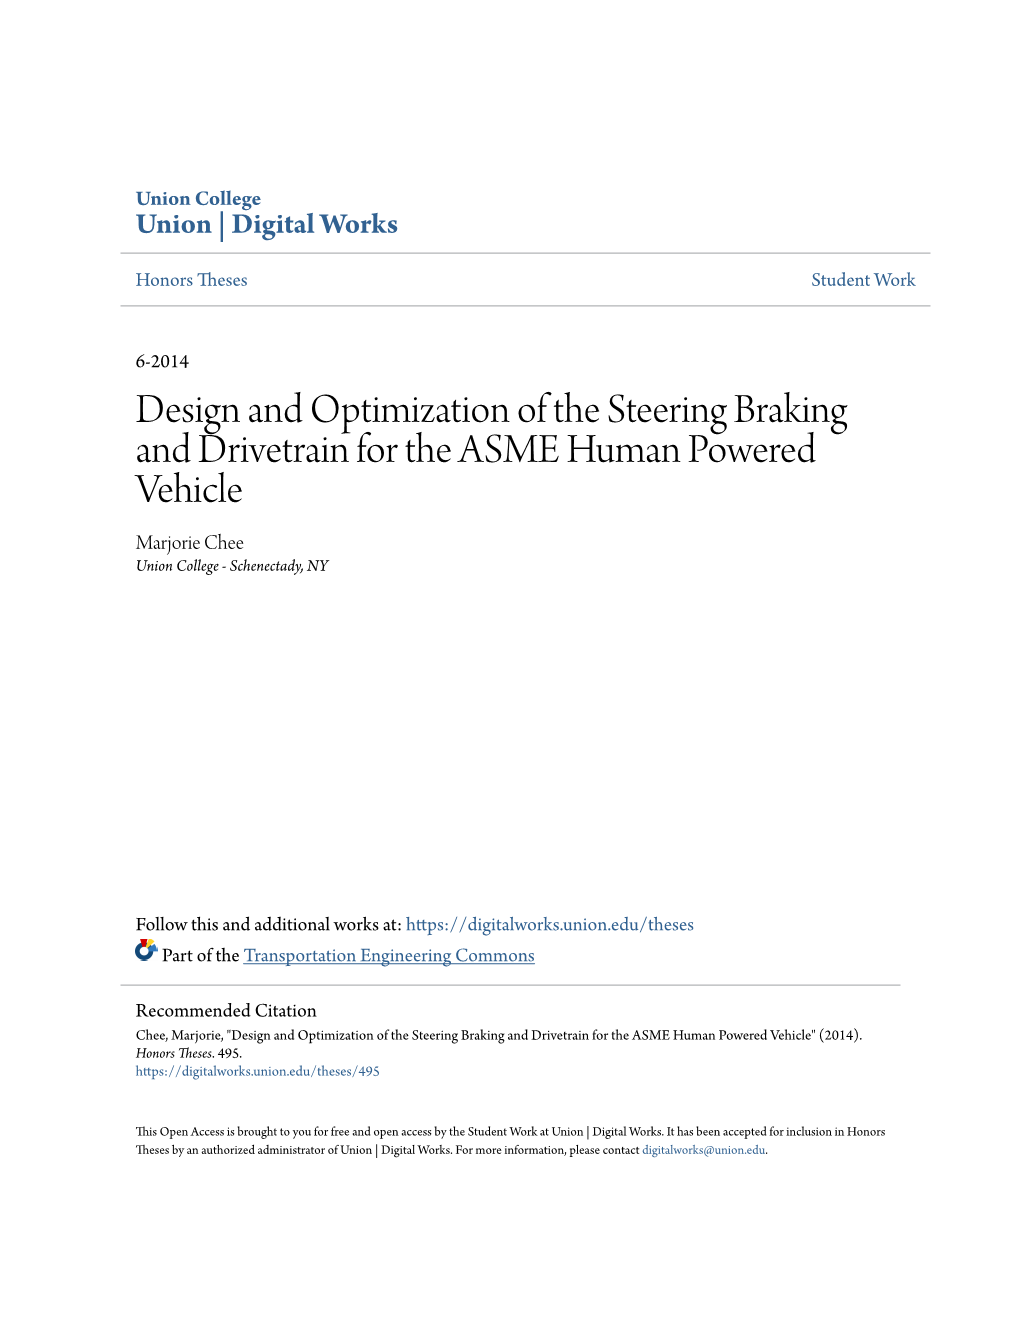 Design and Optimization of the Steering Braking and Drivetrain for the ASME Human Powered Vehicle Marjorie Chee Union College - Schenectady, NY